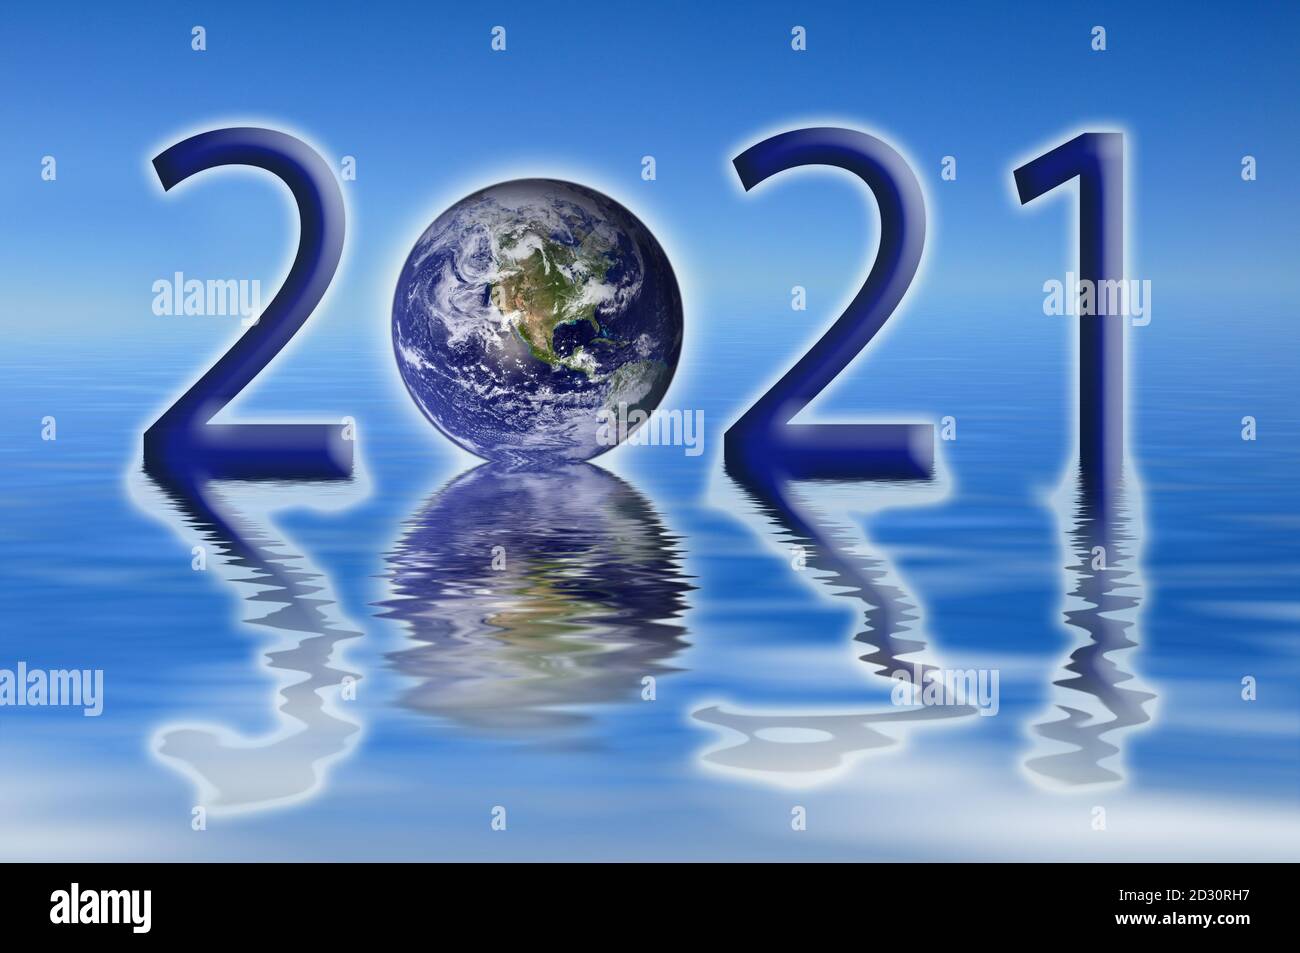 2021, new year for earth, climage change and environment concept Stock Photo